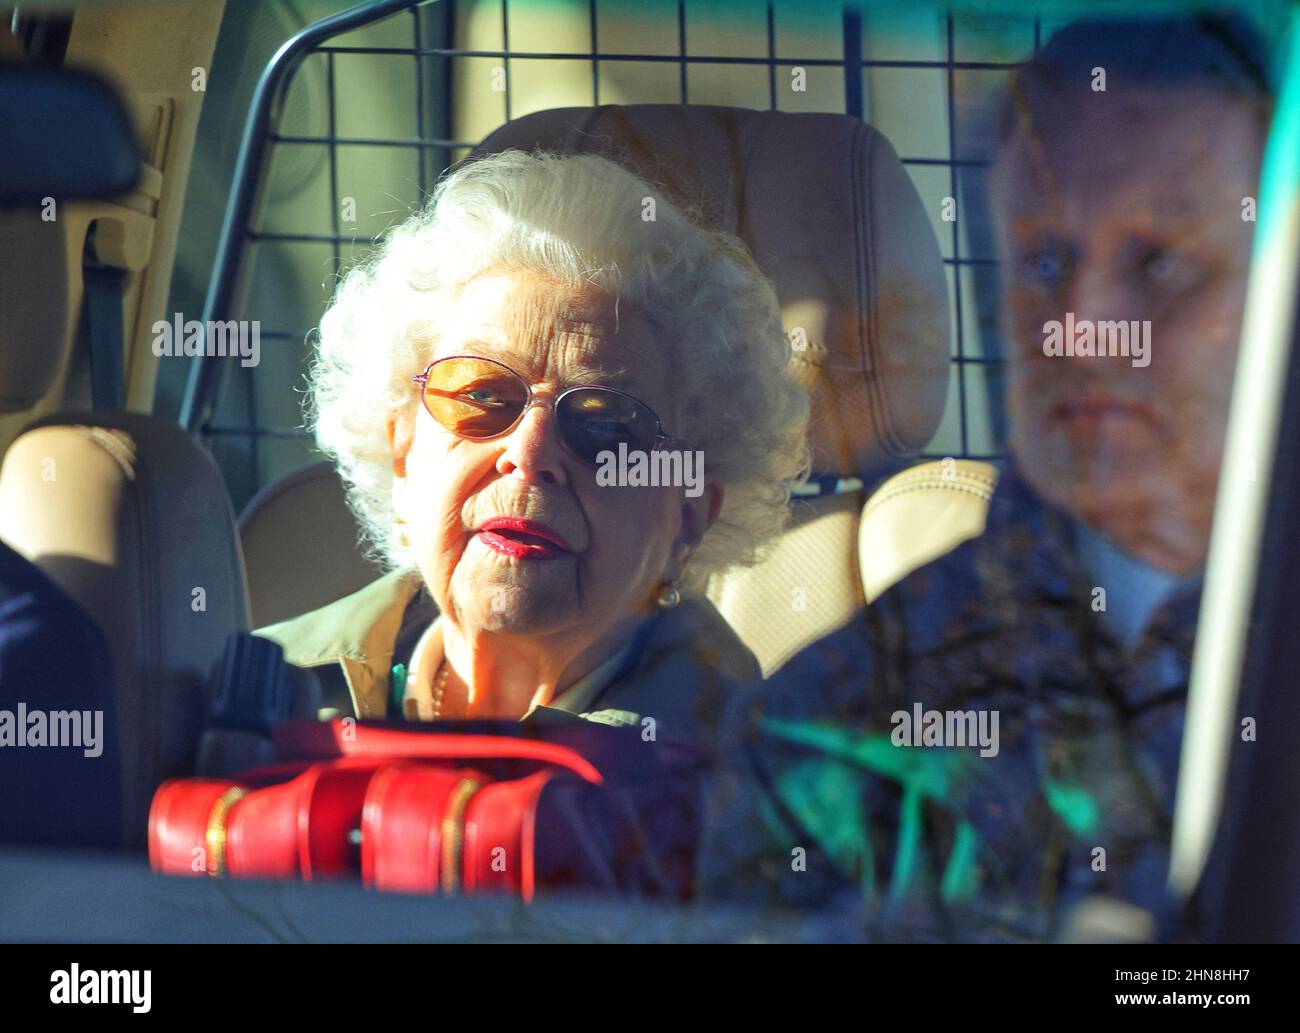 Queen Elizabeth II is seen leaving her Sandringham Estate, the day after Accession Day, (February 6), which marked 70 years since the death of her father King George VI, and when she was proclaimed Queen. Her Majesty took a helicopter flight from Sandringham to Windsor Castle. Queen Elizabeth II, Sandringham, Norfolk, UK, on February 7, 2022 Stock Photo